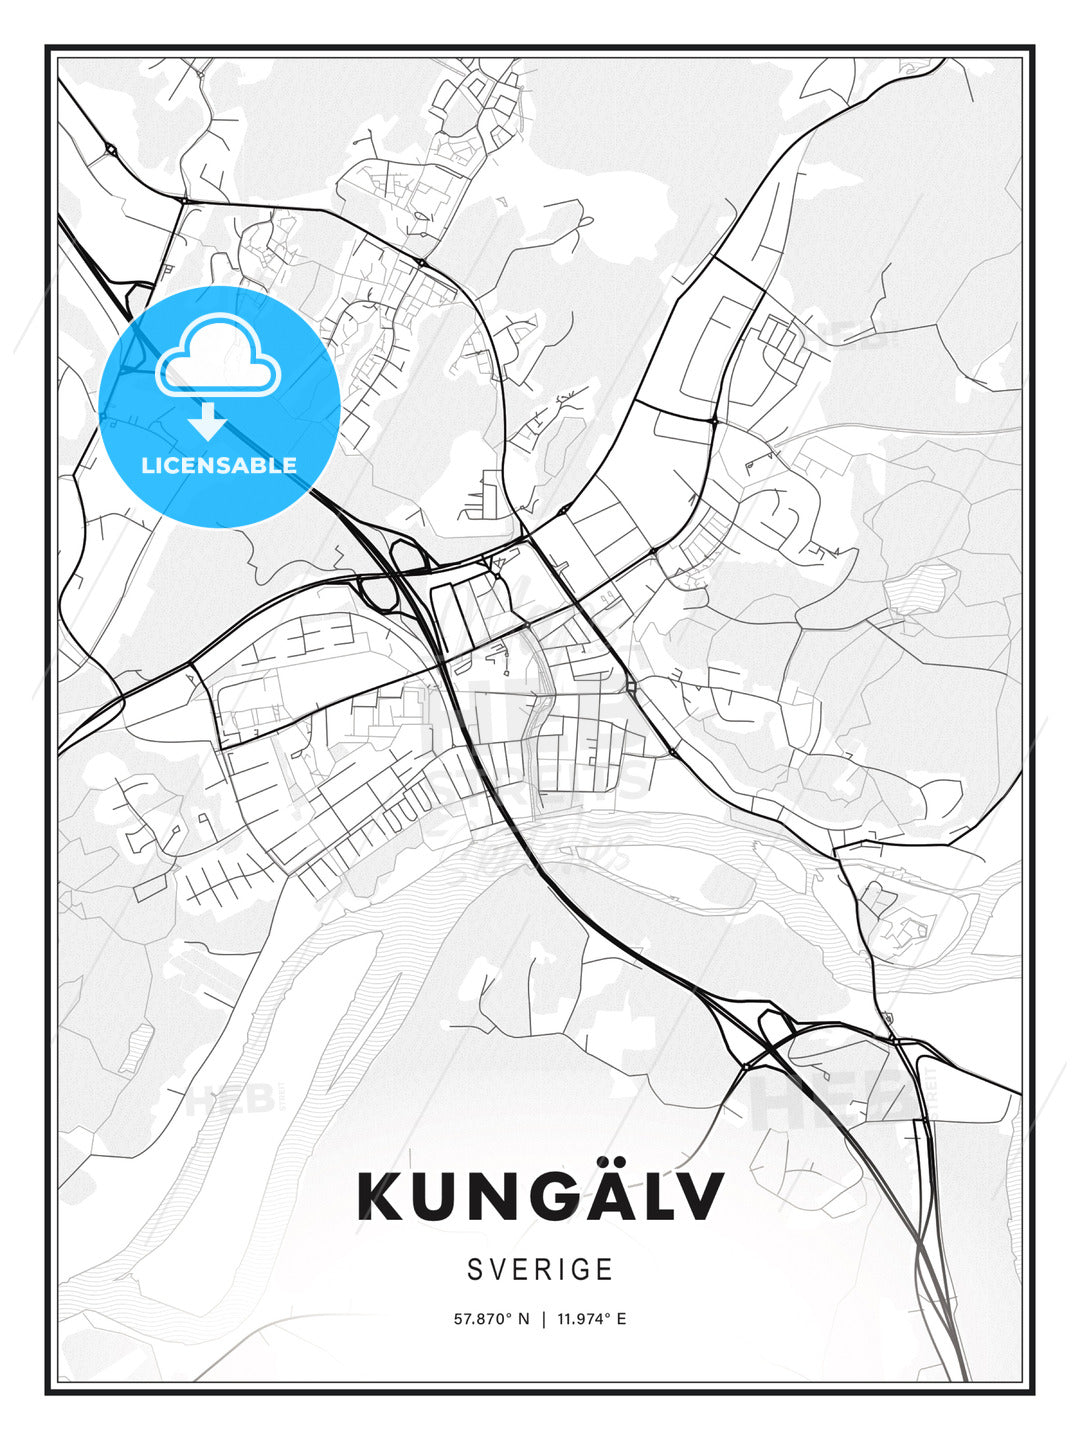 Kungälv, Sweden, Modern Print Template in Various Formats - HEBSTREITS Sketches